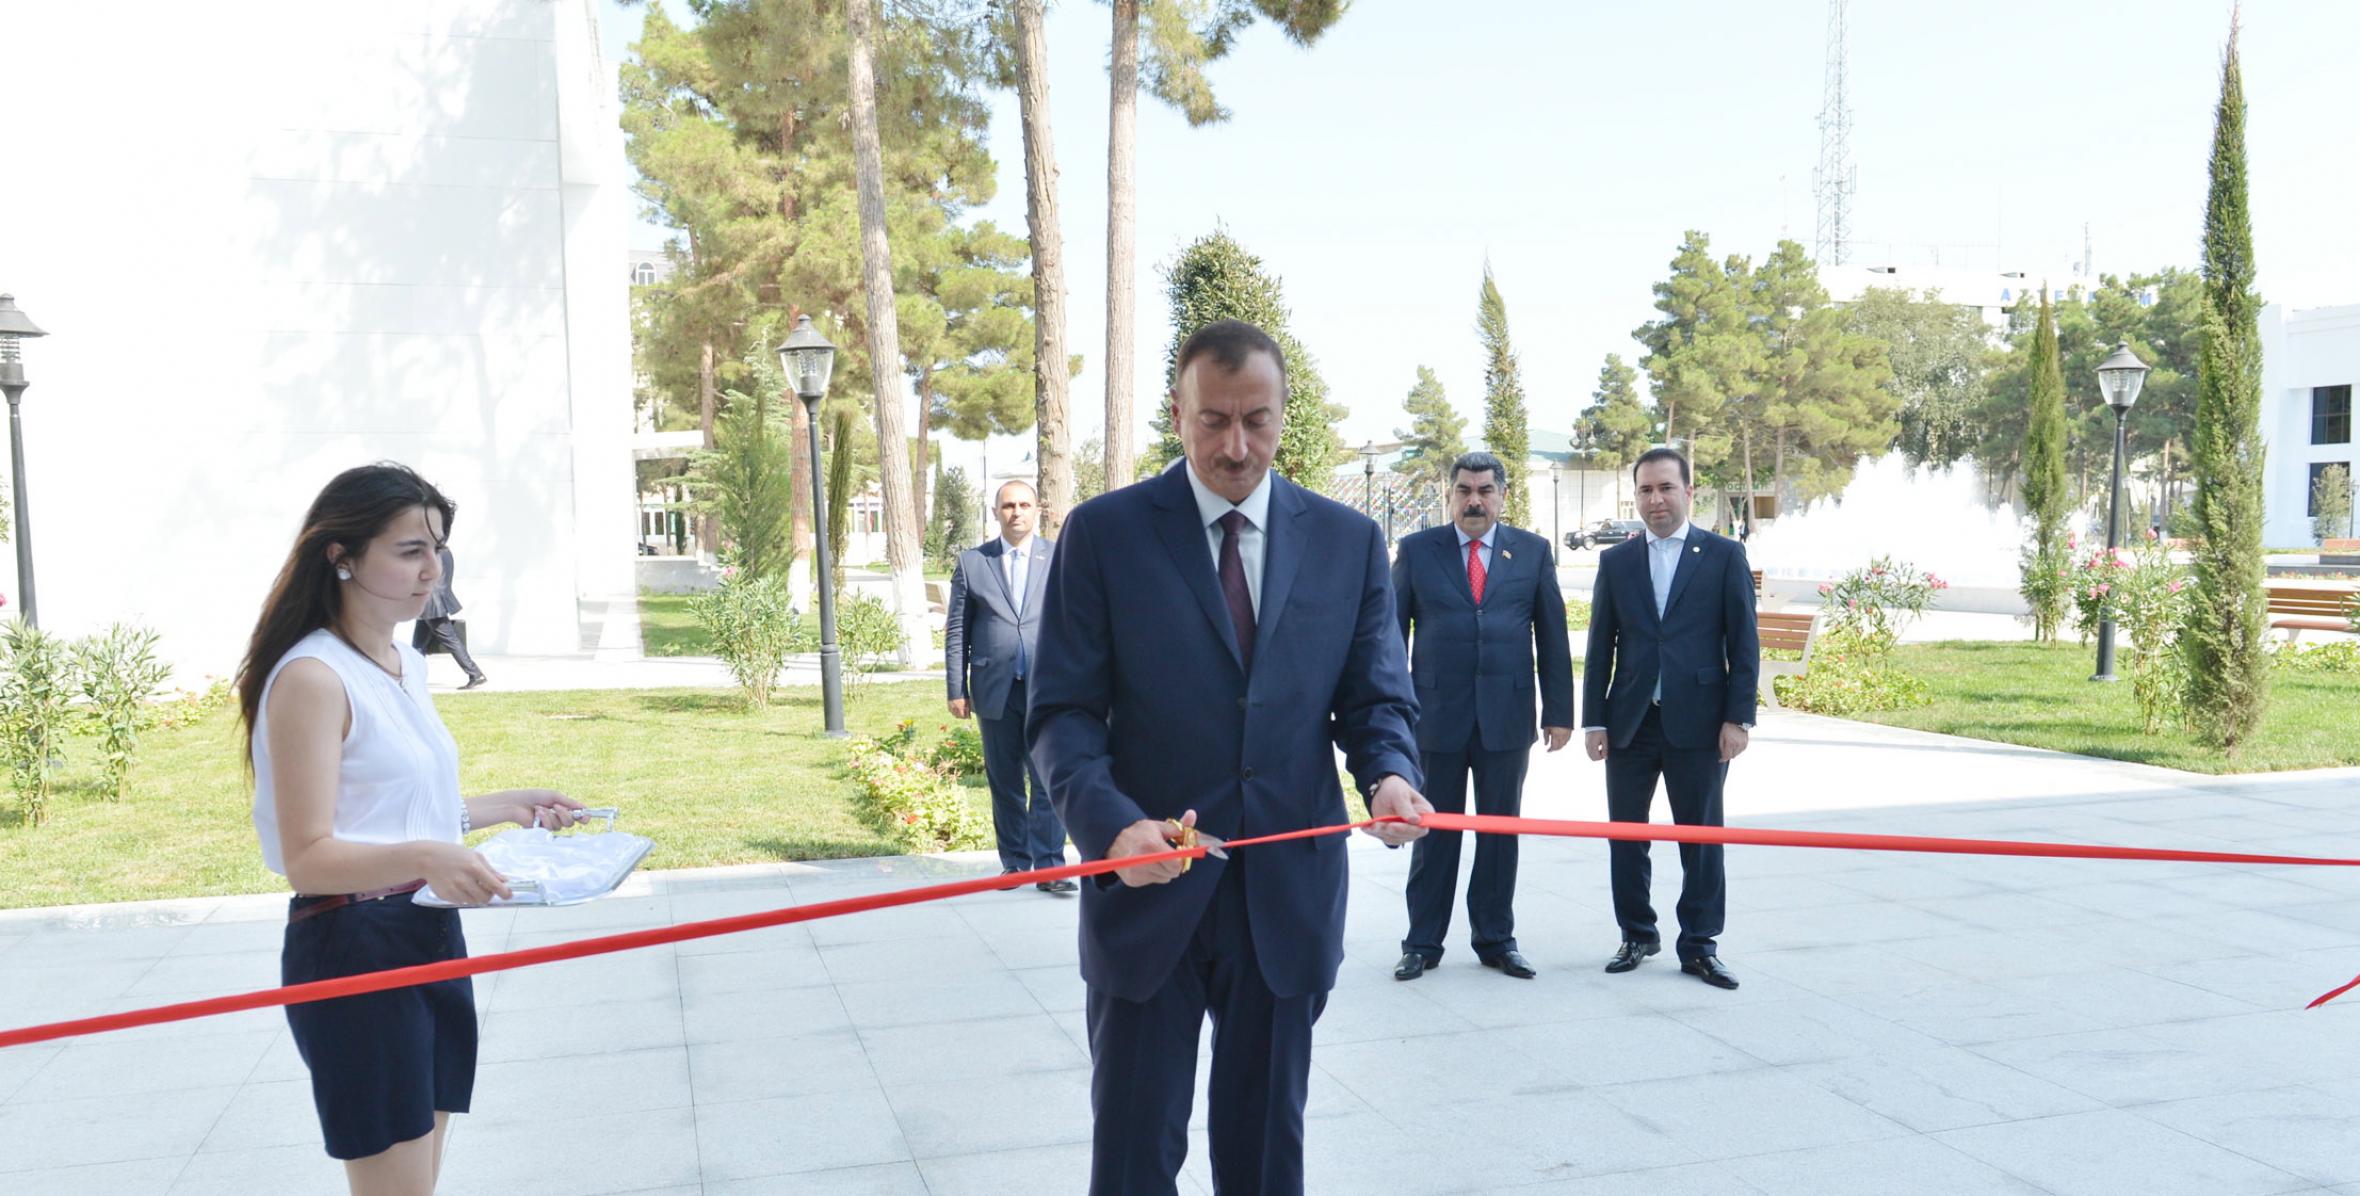 Ilham Aliyev attended the opening of a new office building of the Sabirabad District branch of the "Yeni Azerbaijan Party"